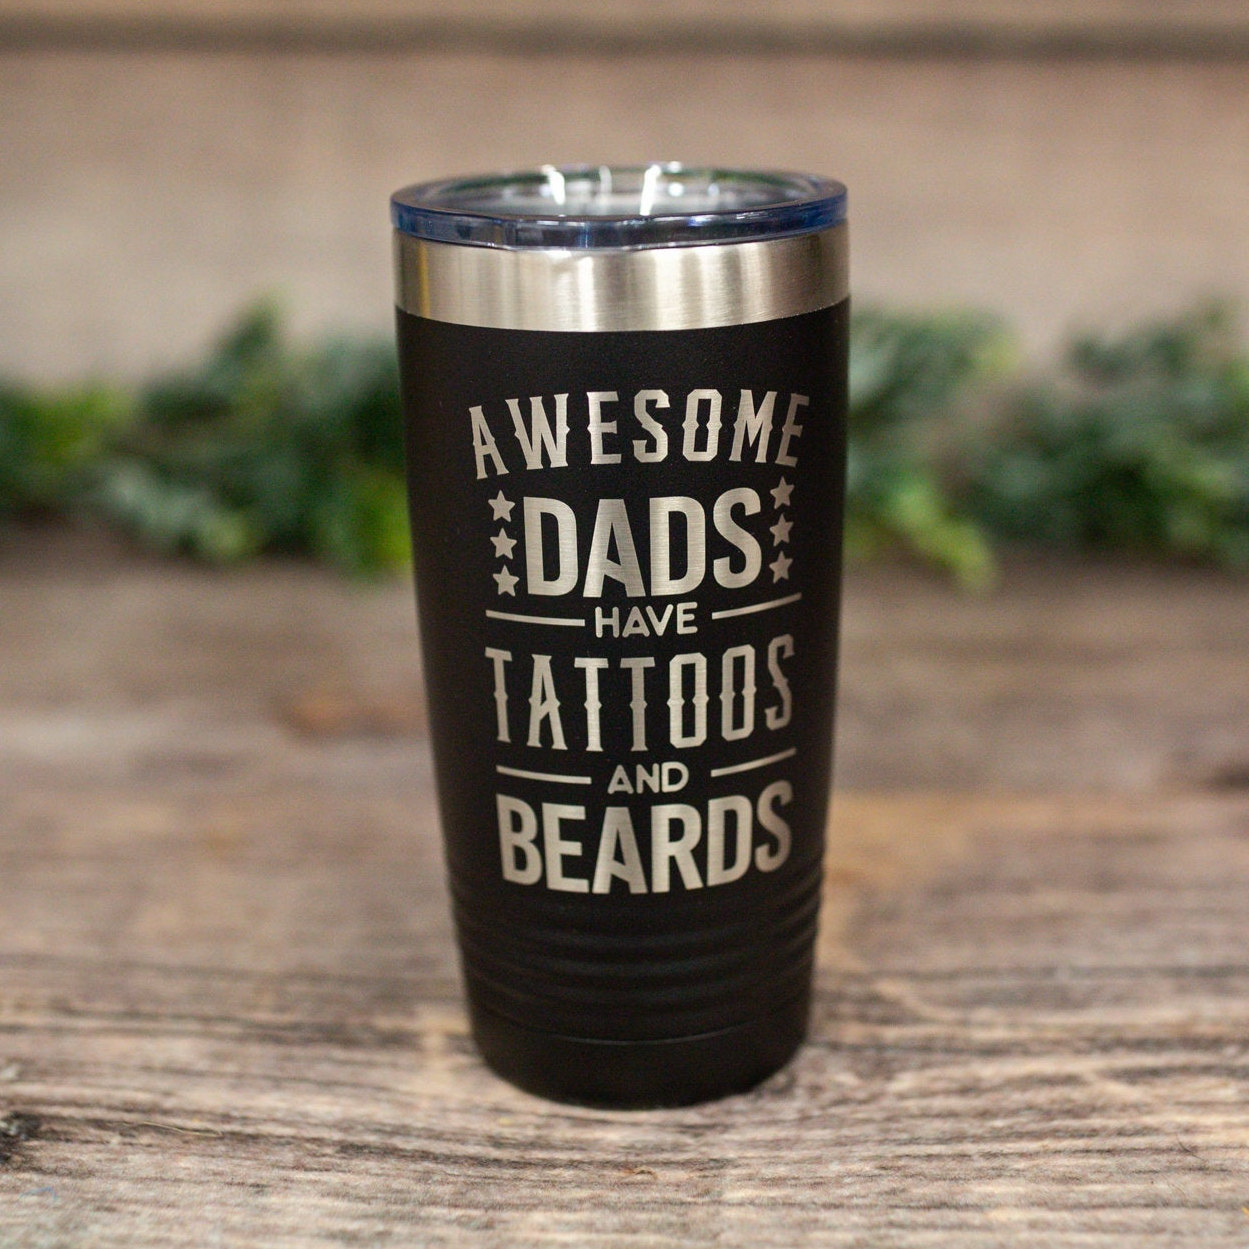 https://3cetching.com/wp-content/uploads/2021/07/awesome-dads-have-tattoos-and-beards-engraved-steel-tumbler-dad-gift-funny-dad-mug-60f75c67.jpg